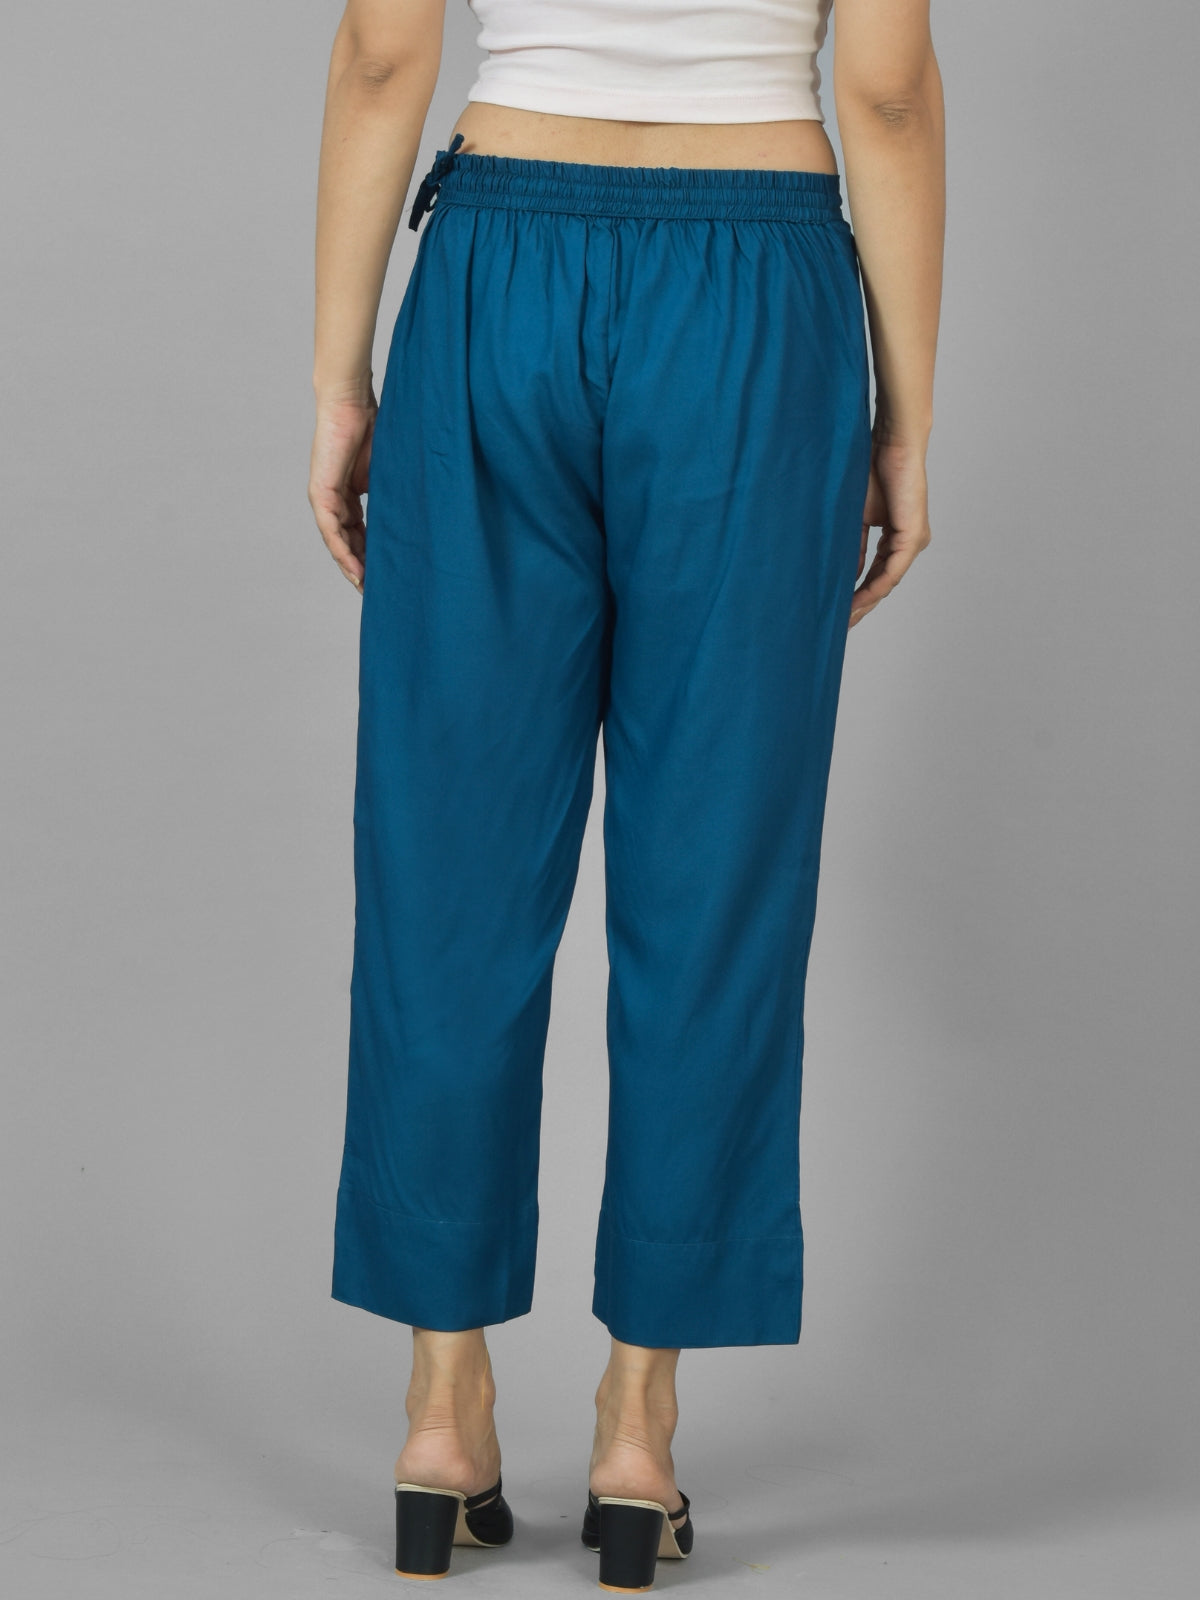 Pack Of 2 Womens Mustard And Teal Blue Ankle Length Rayon Culottes Trouser Combo